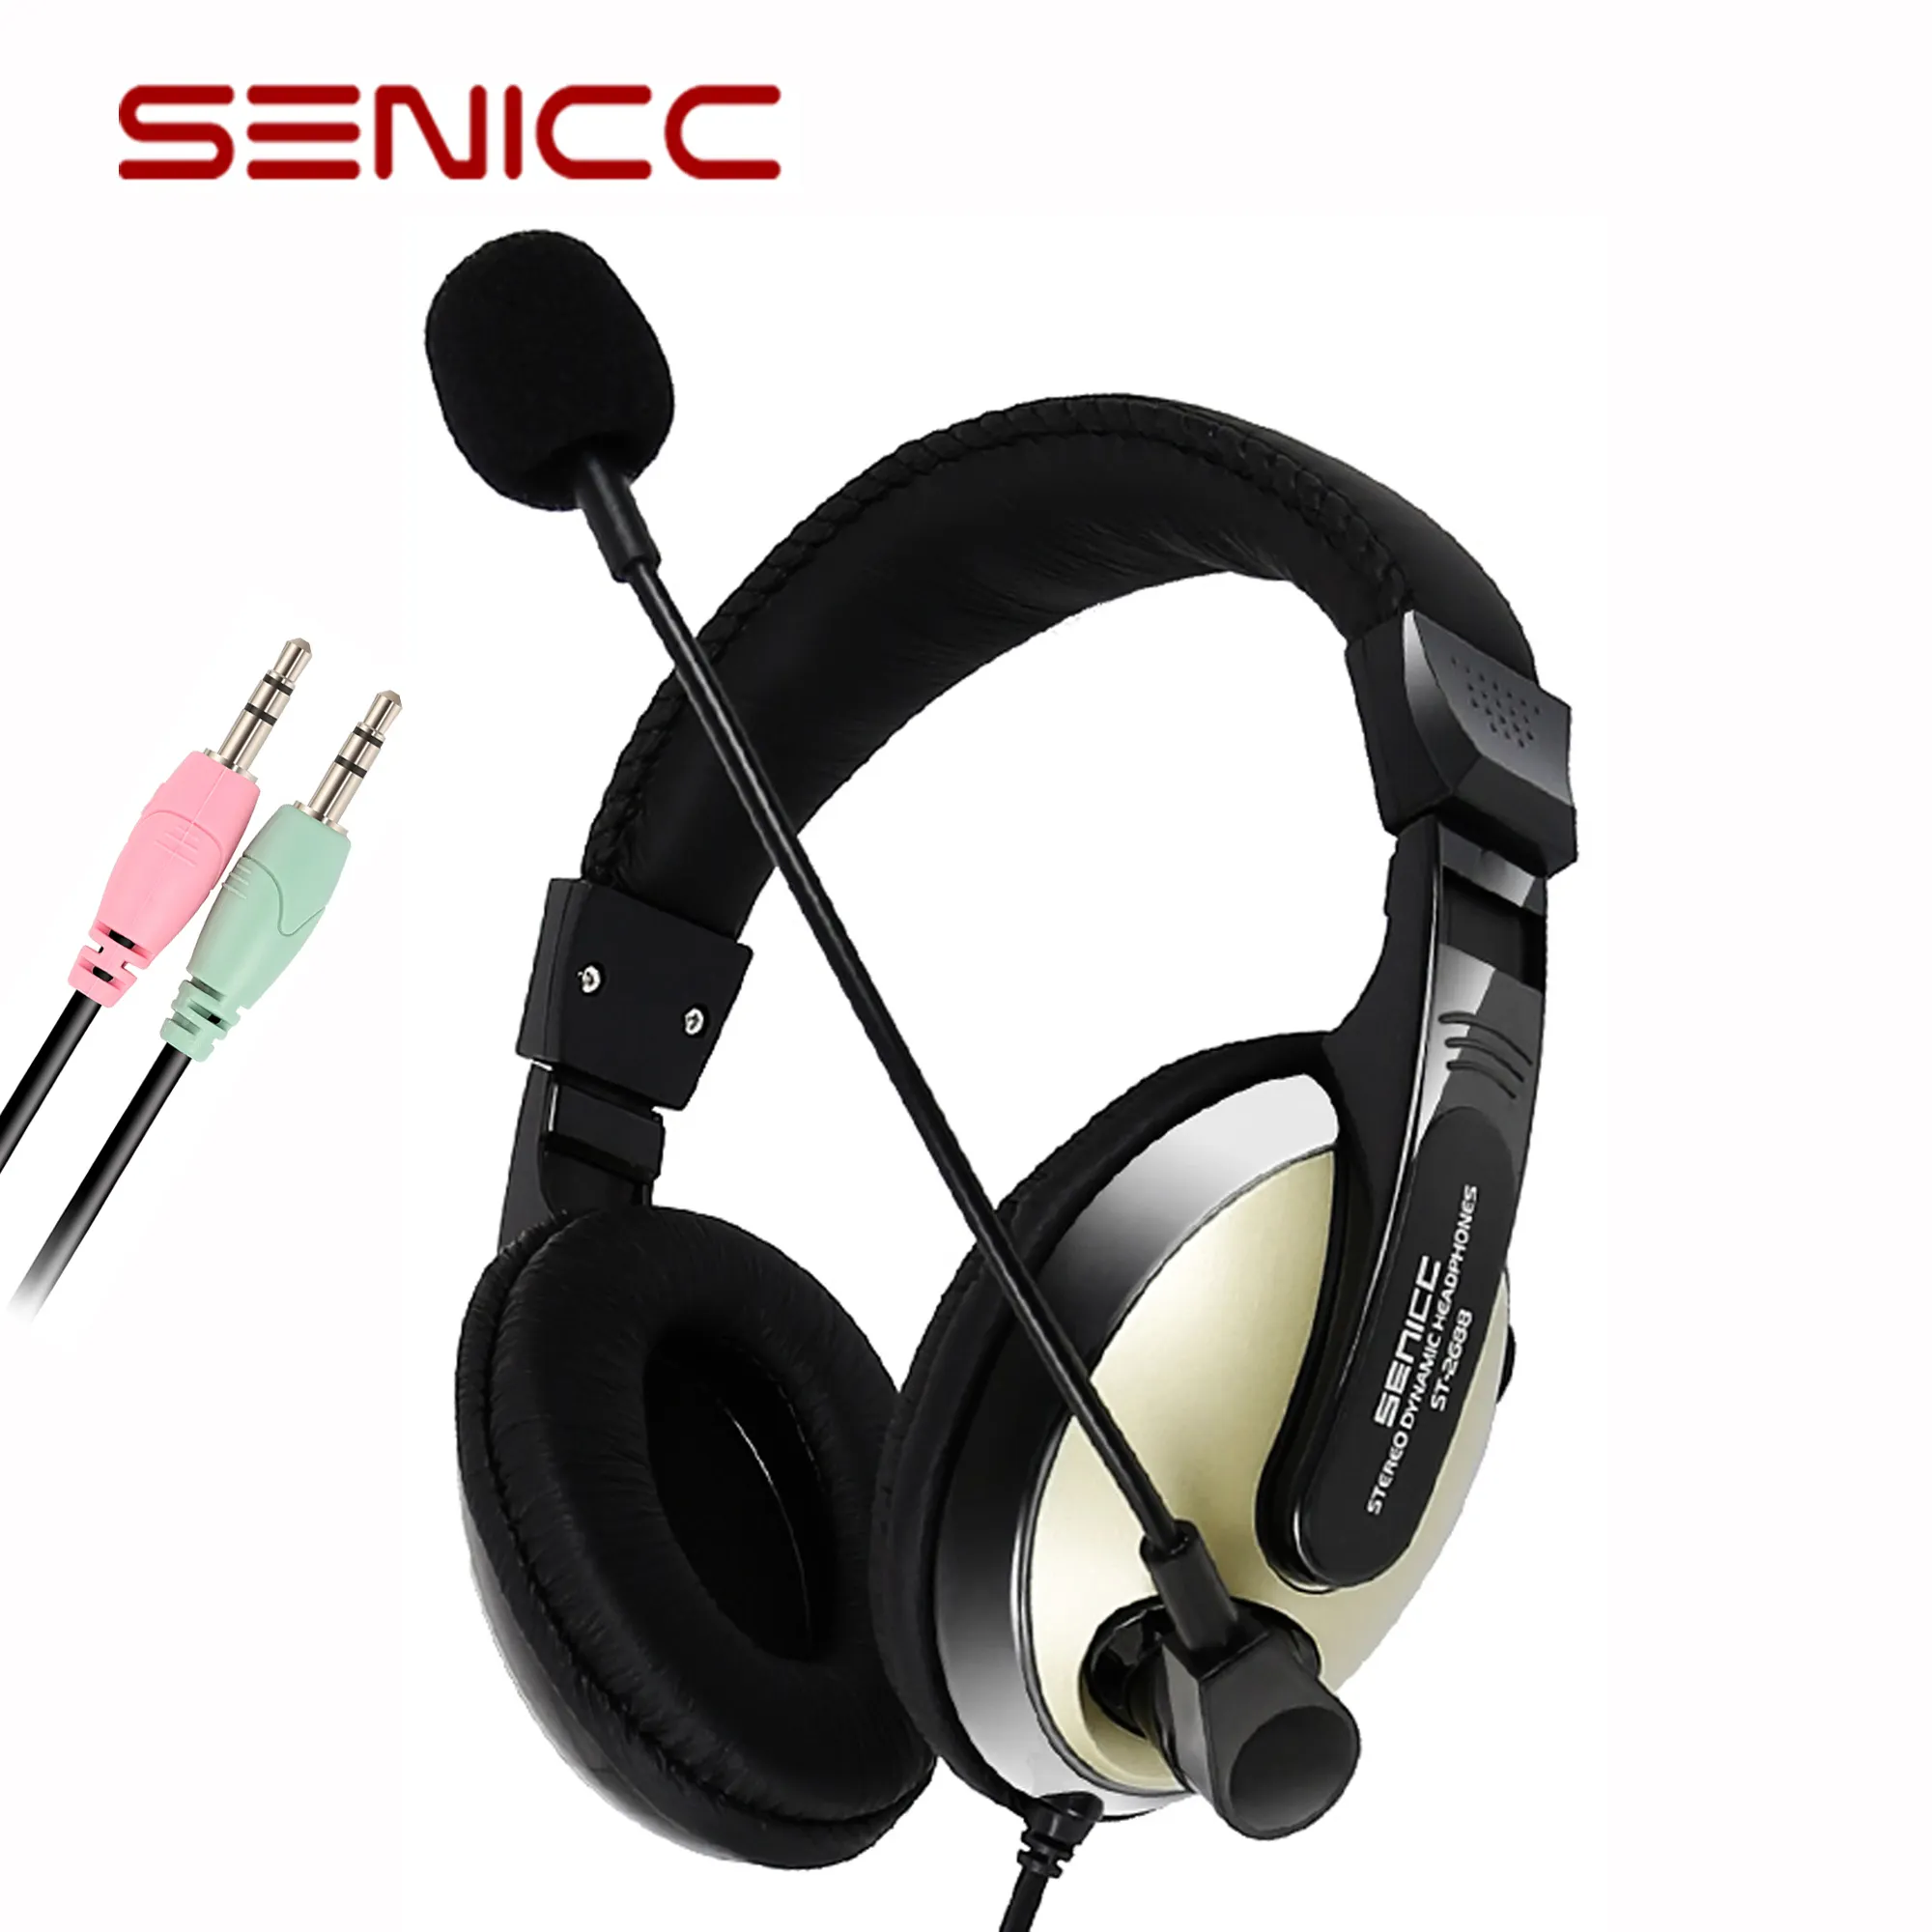 SOMIC ST-2688 PC gamer stereo headset office headsets with microphone best price auodio PC computer headphones for XBOX ONE